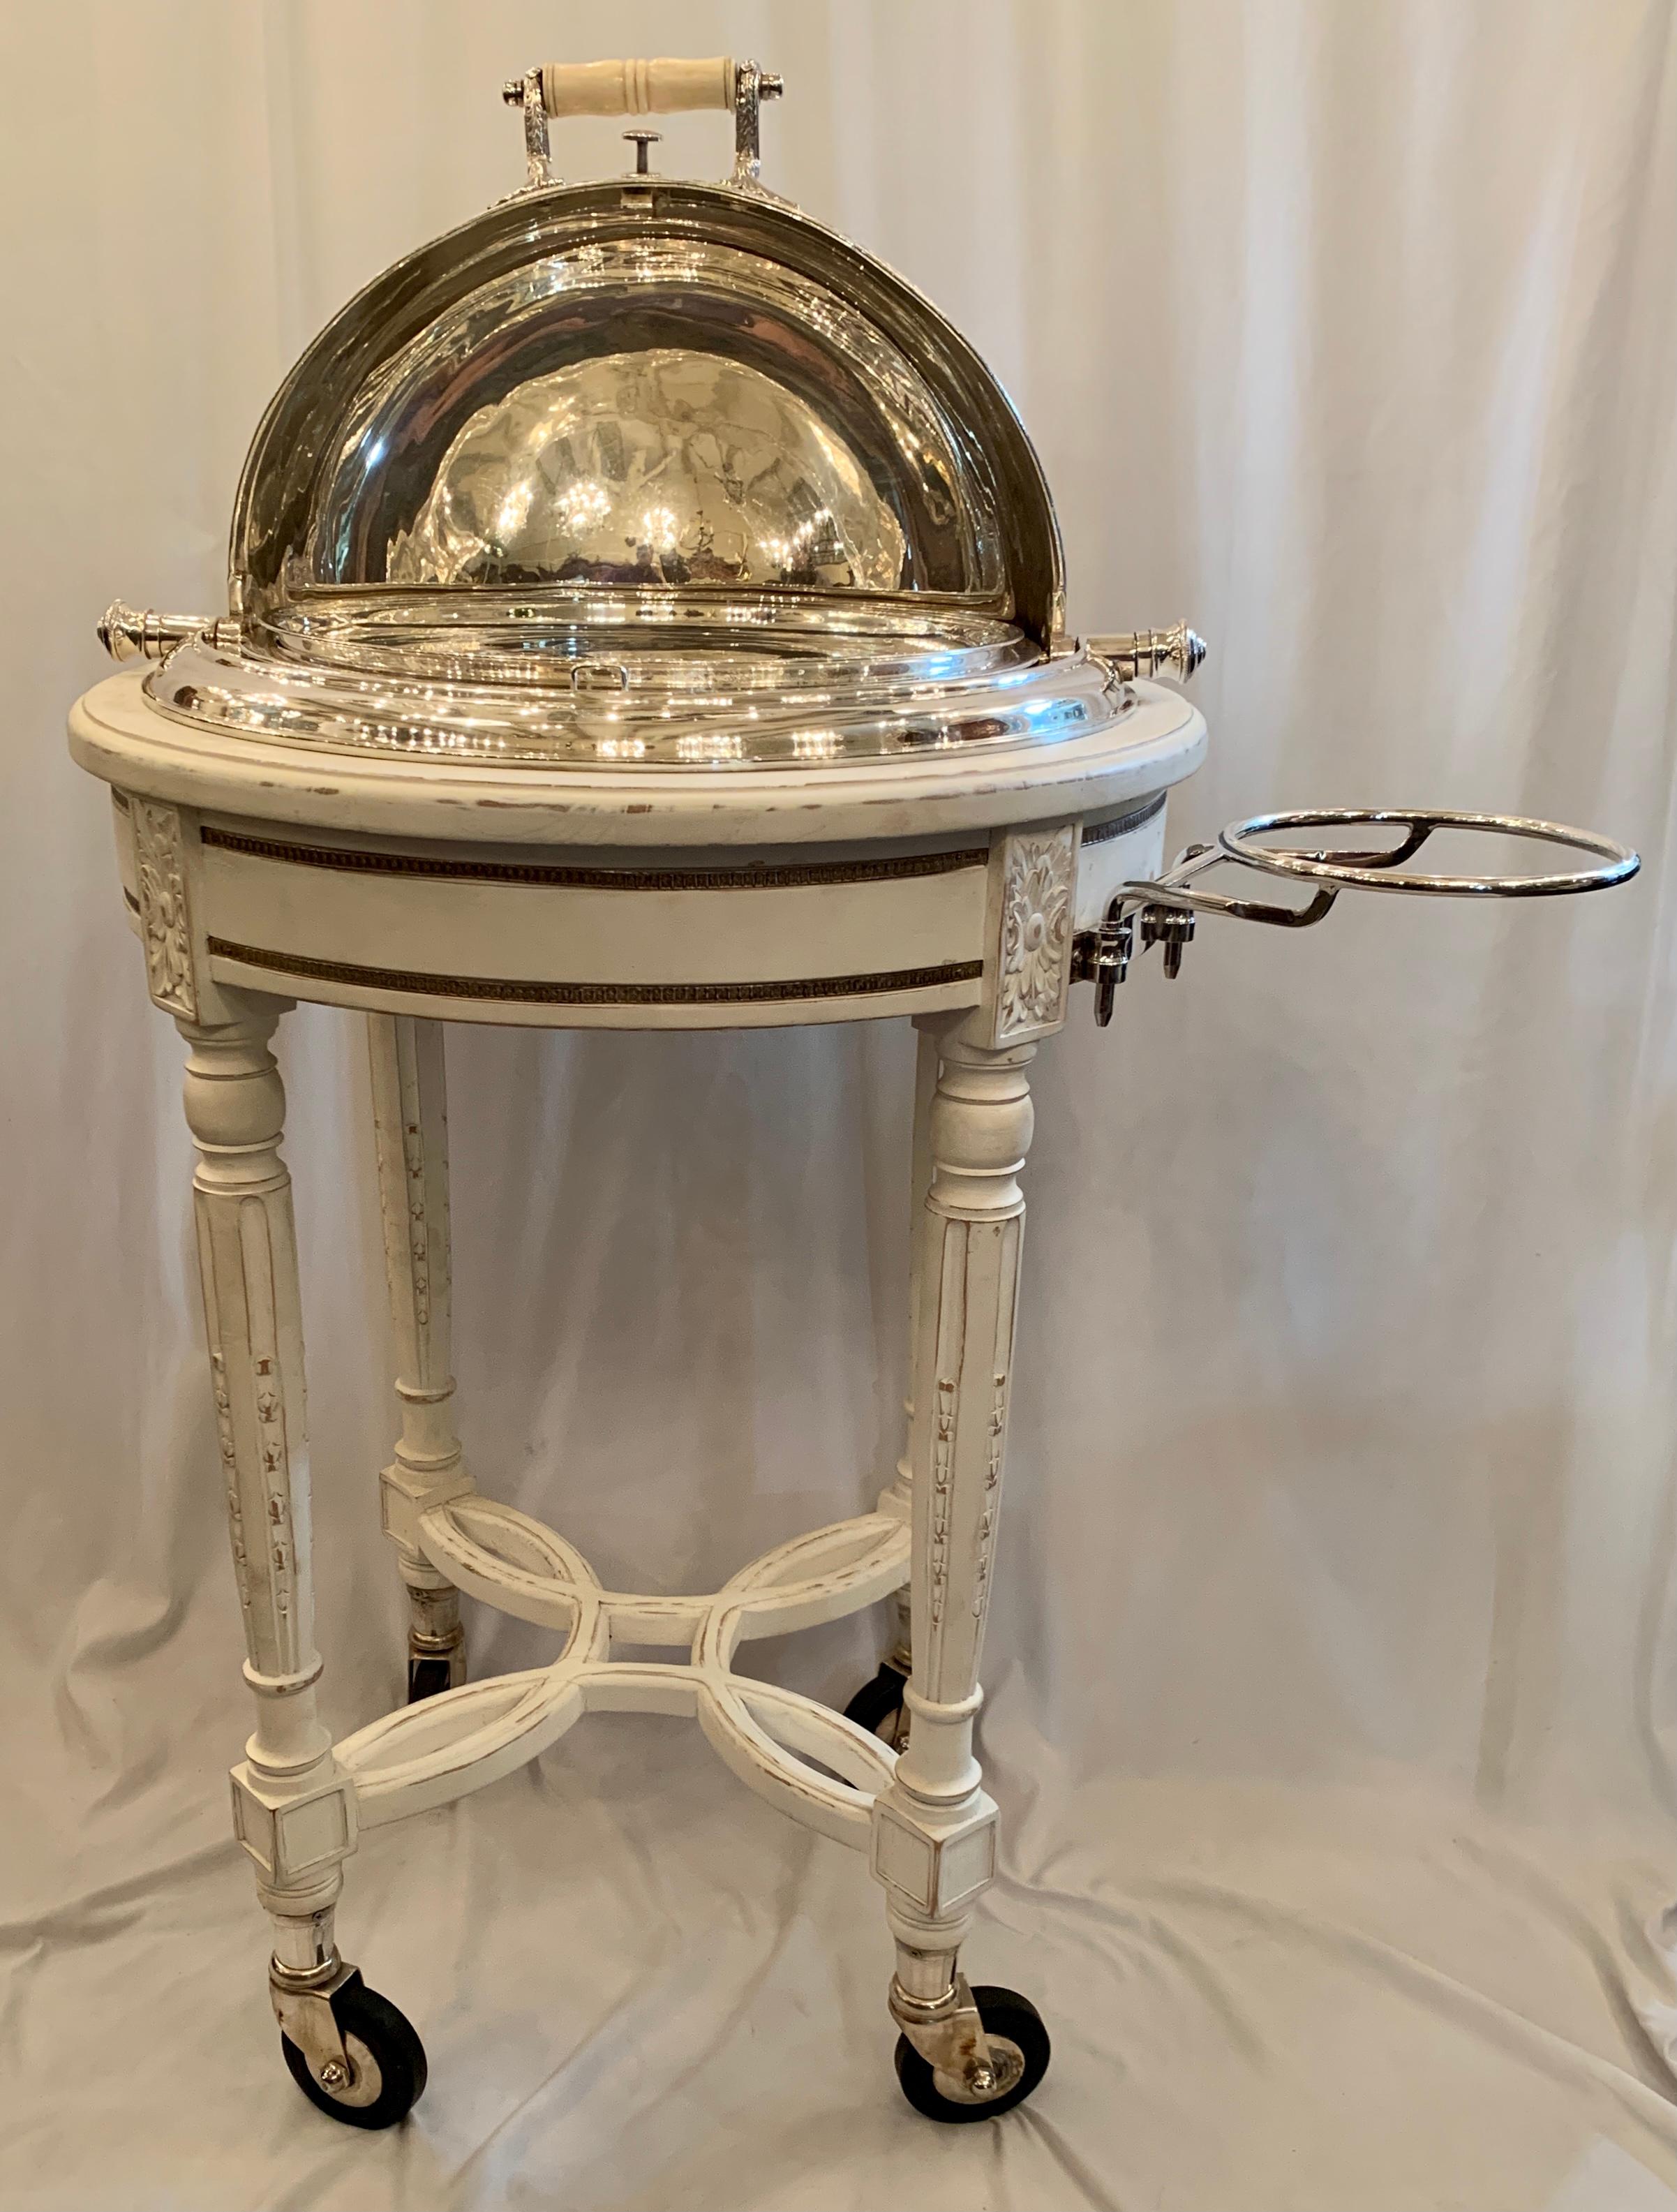 Estate handmade silver-plated meat carving trolley cart with removeable interior tray and alcohol burners.